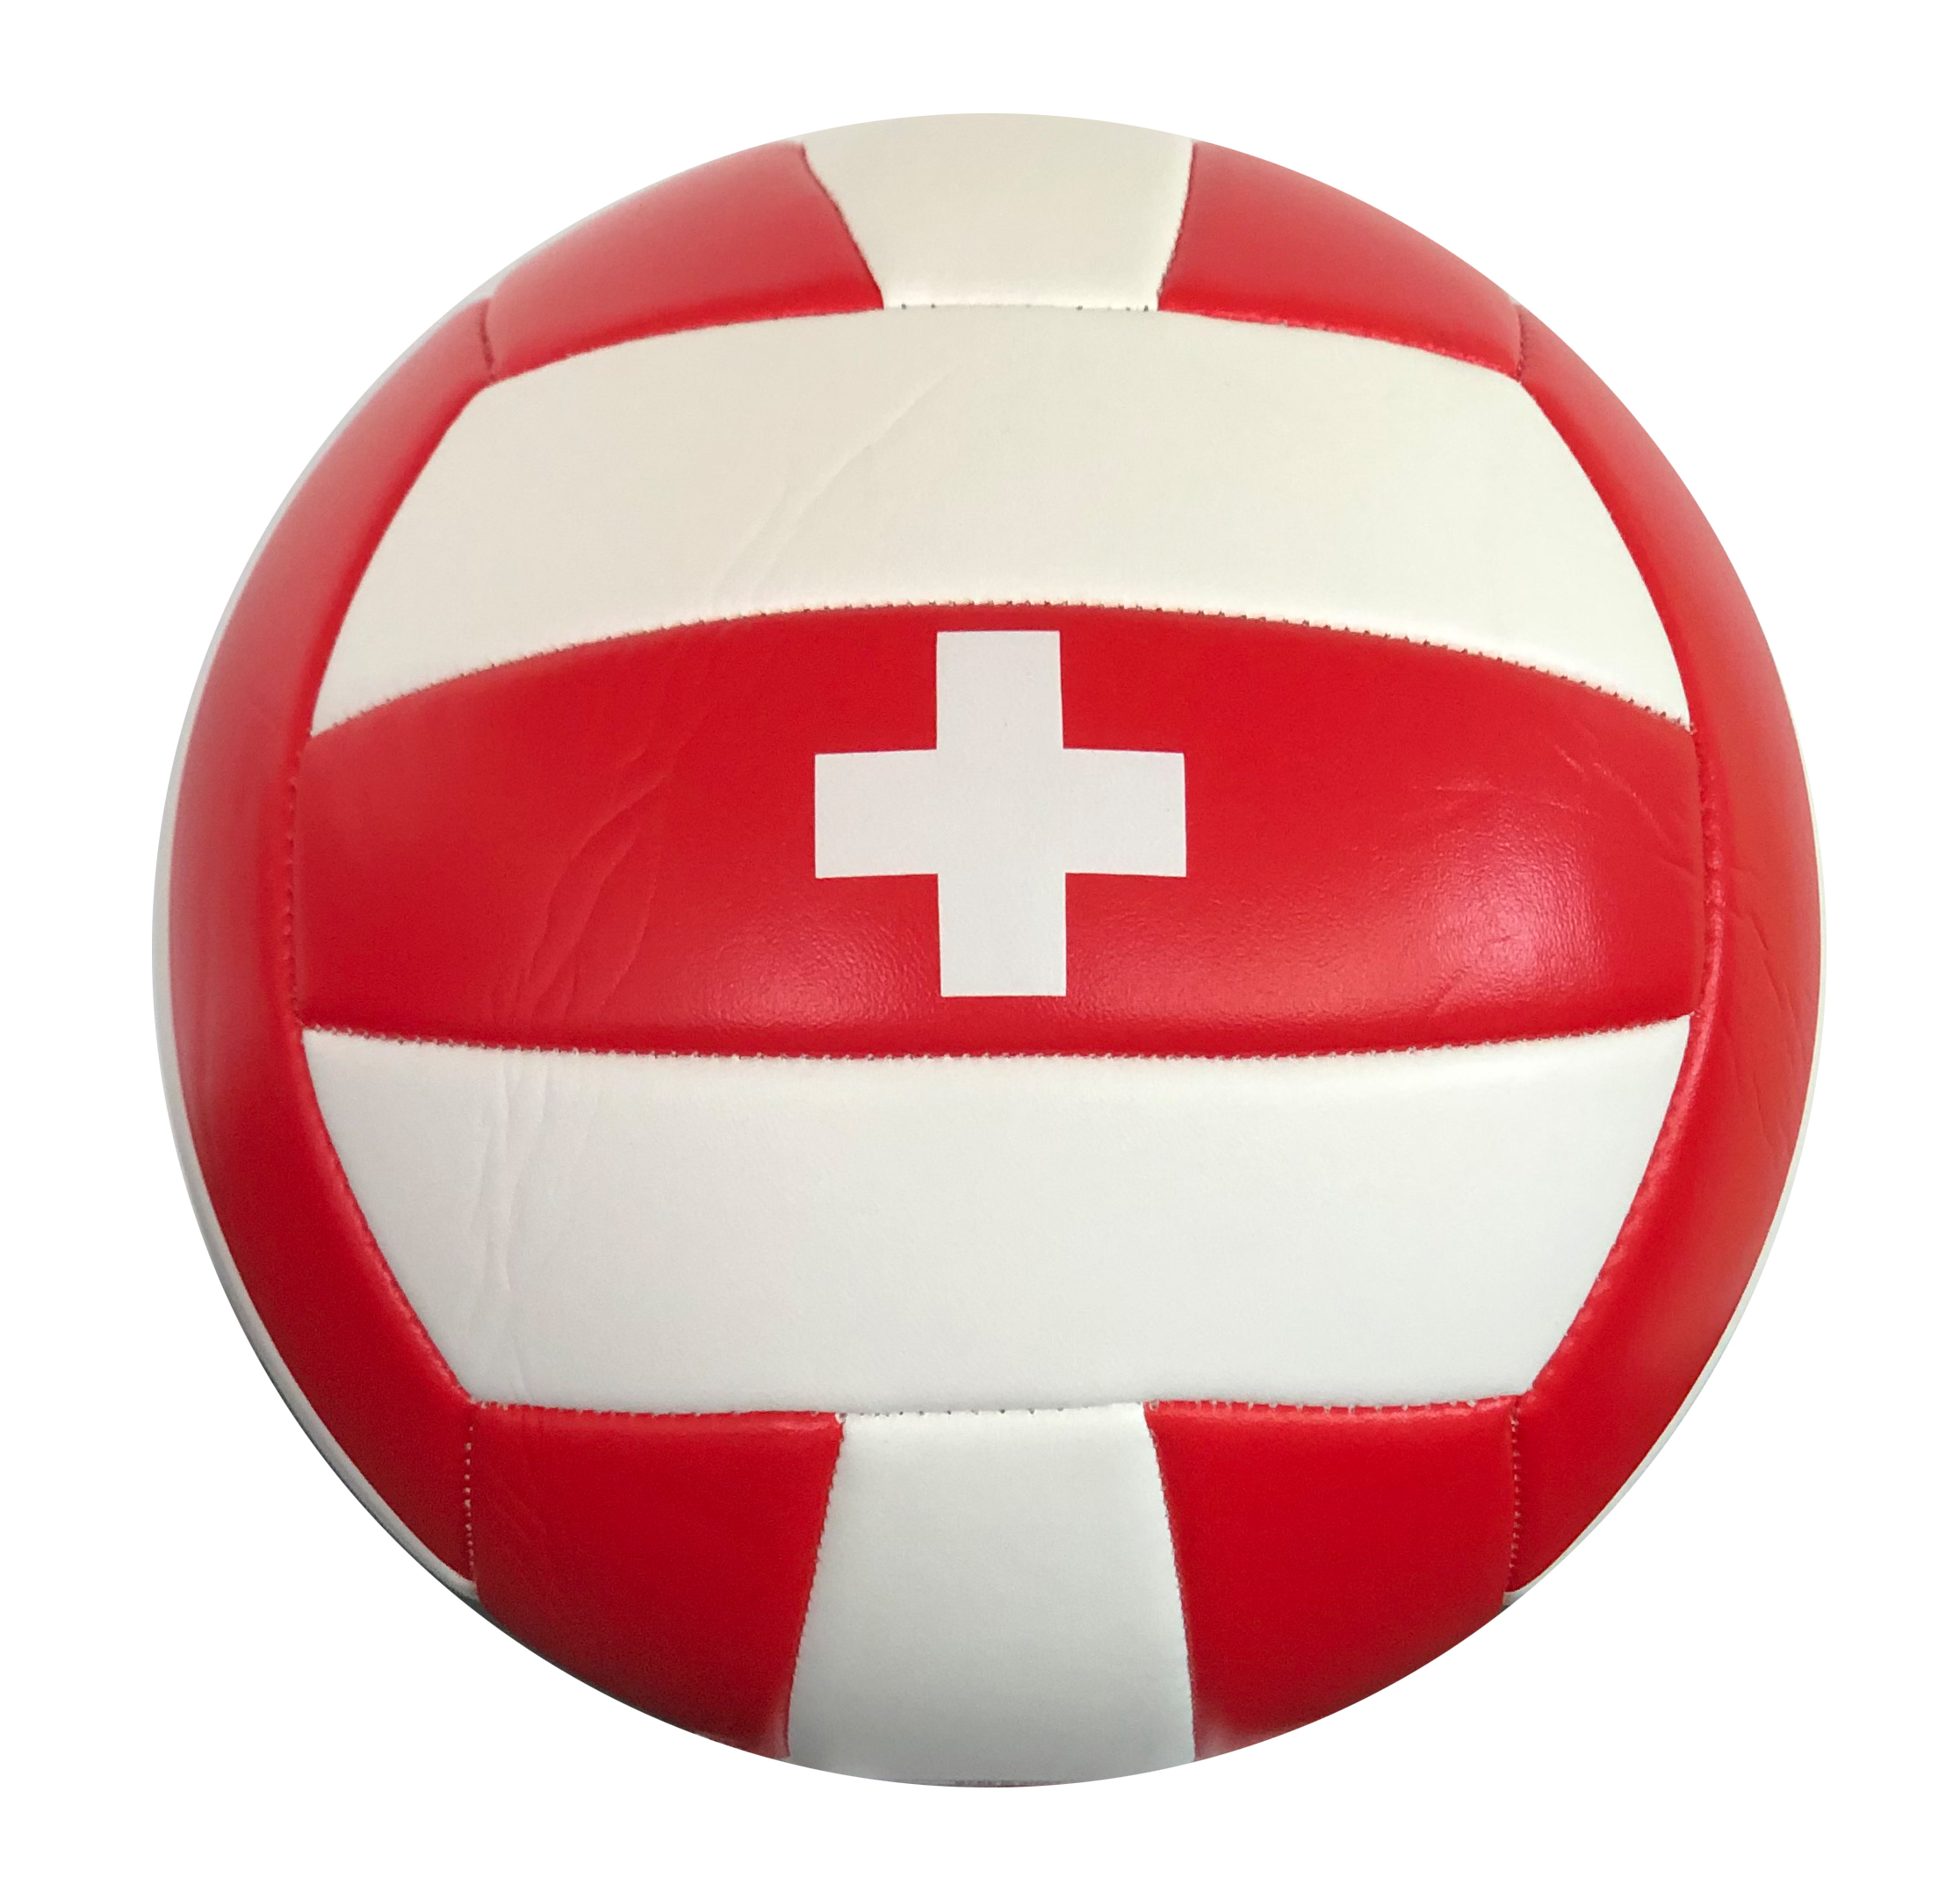  Volleyball Set Suisse